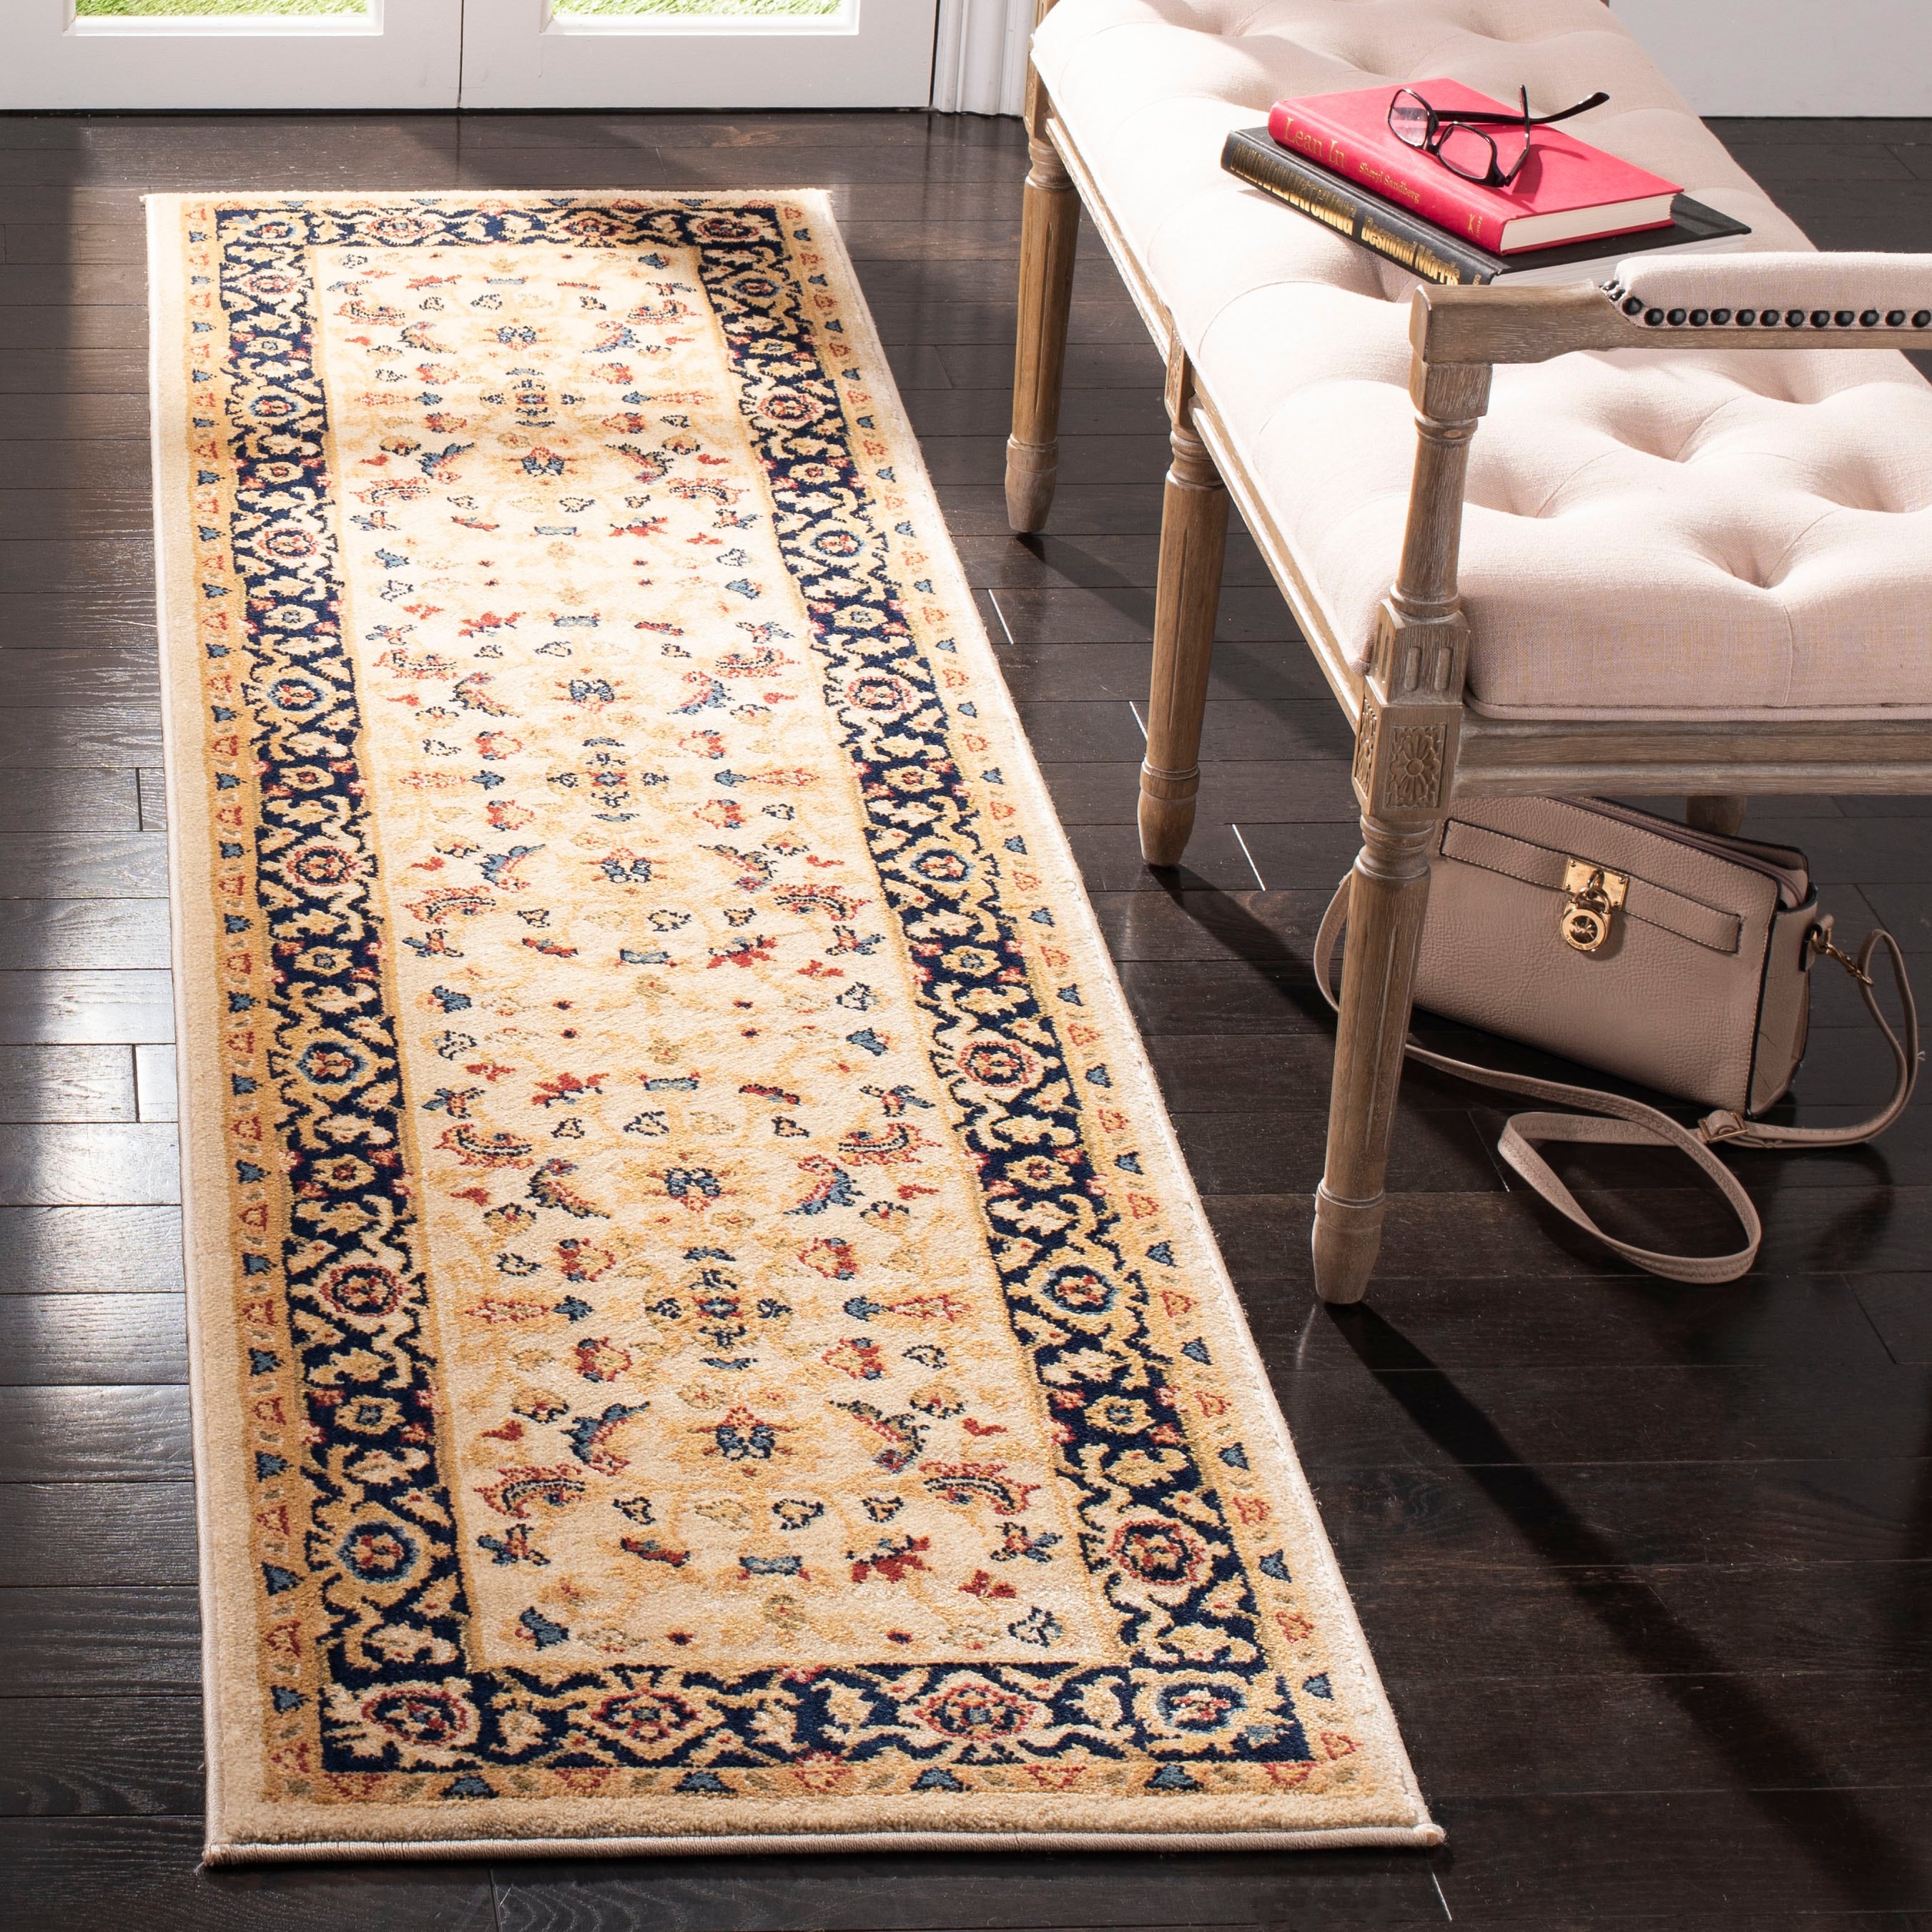 https://ak1.ostkcdn.com/images/products/is/images/direct/f02567876bb53eea550489335cf38148e4d2ccc8/SAFAVIEH-Austin-Clarinda-Traditional-Oriental-Rug.jpg